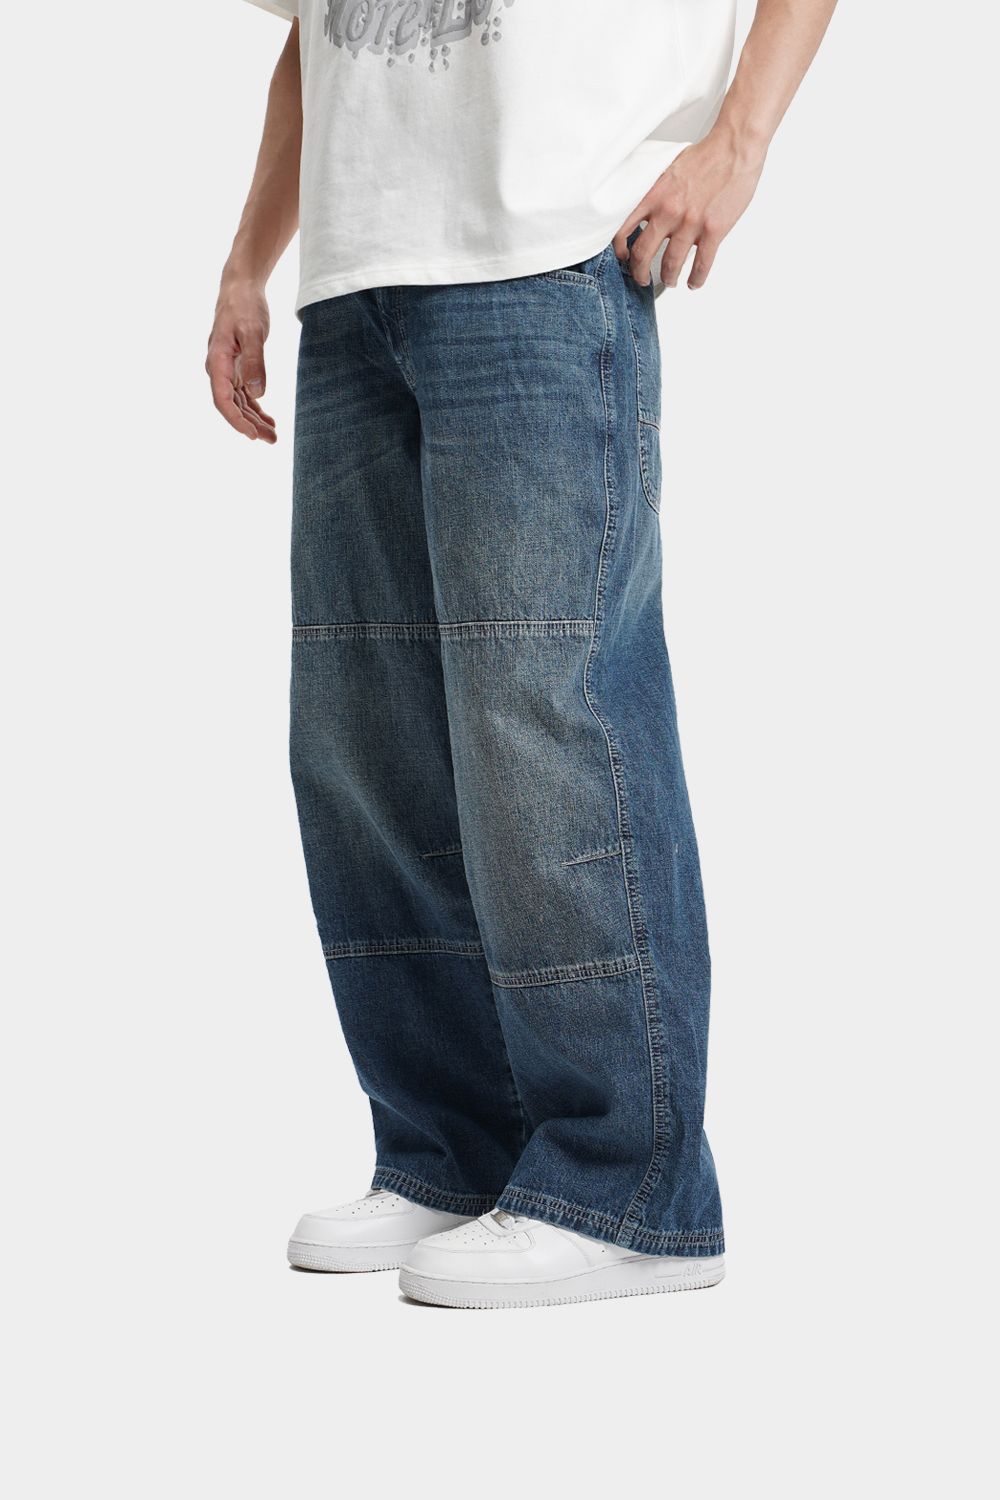 Ultra Baggy Panel Neo Skate Jeans (URBN-B-208)